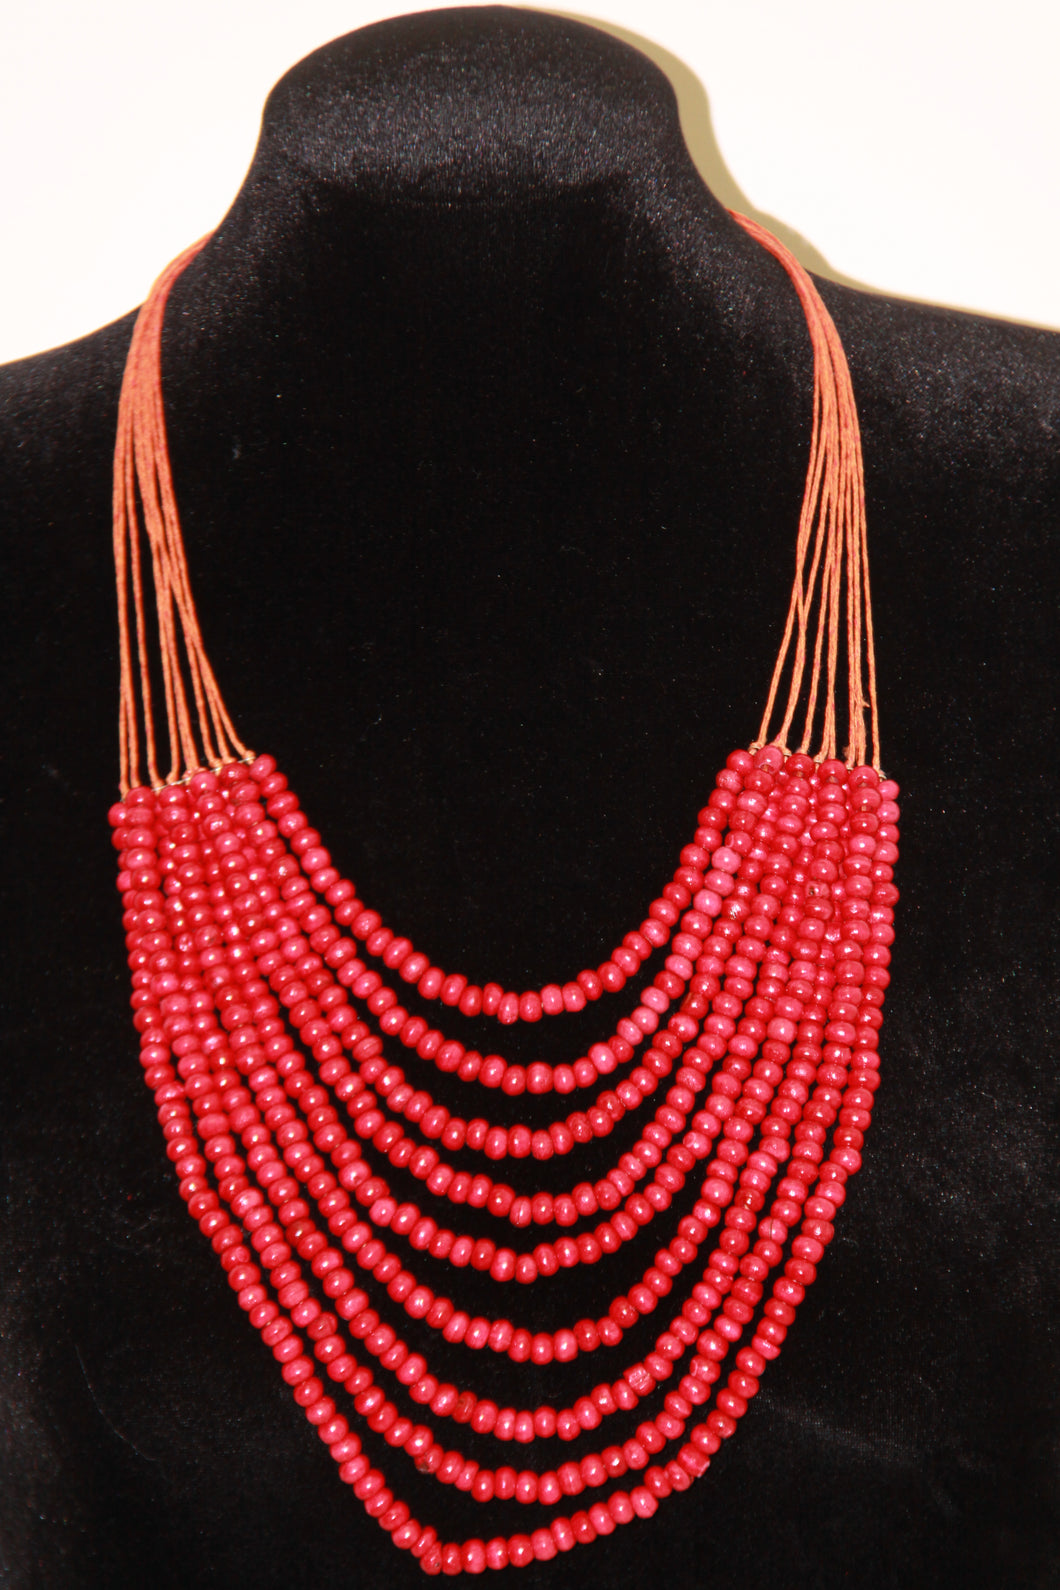 9 Layer Red Bead Necklace